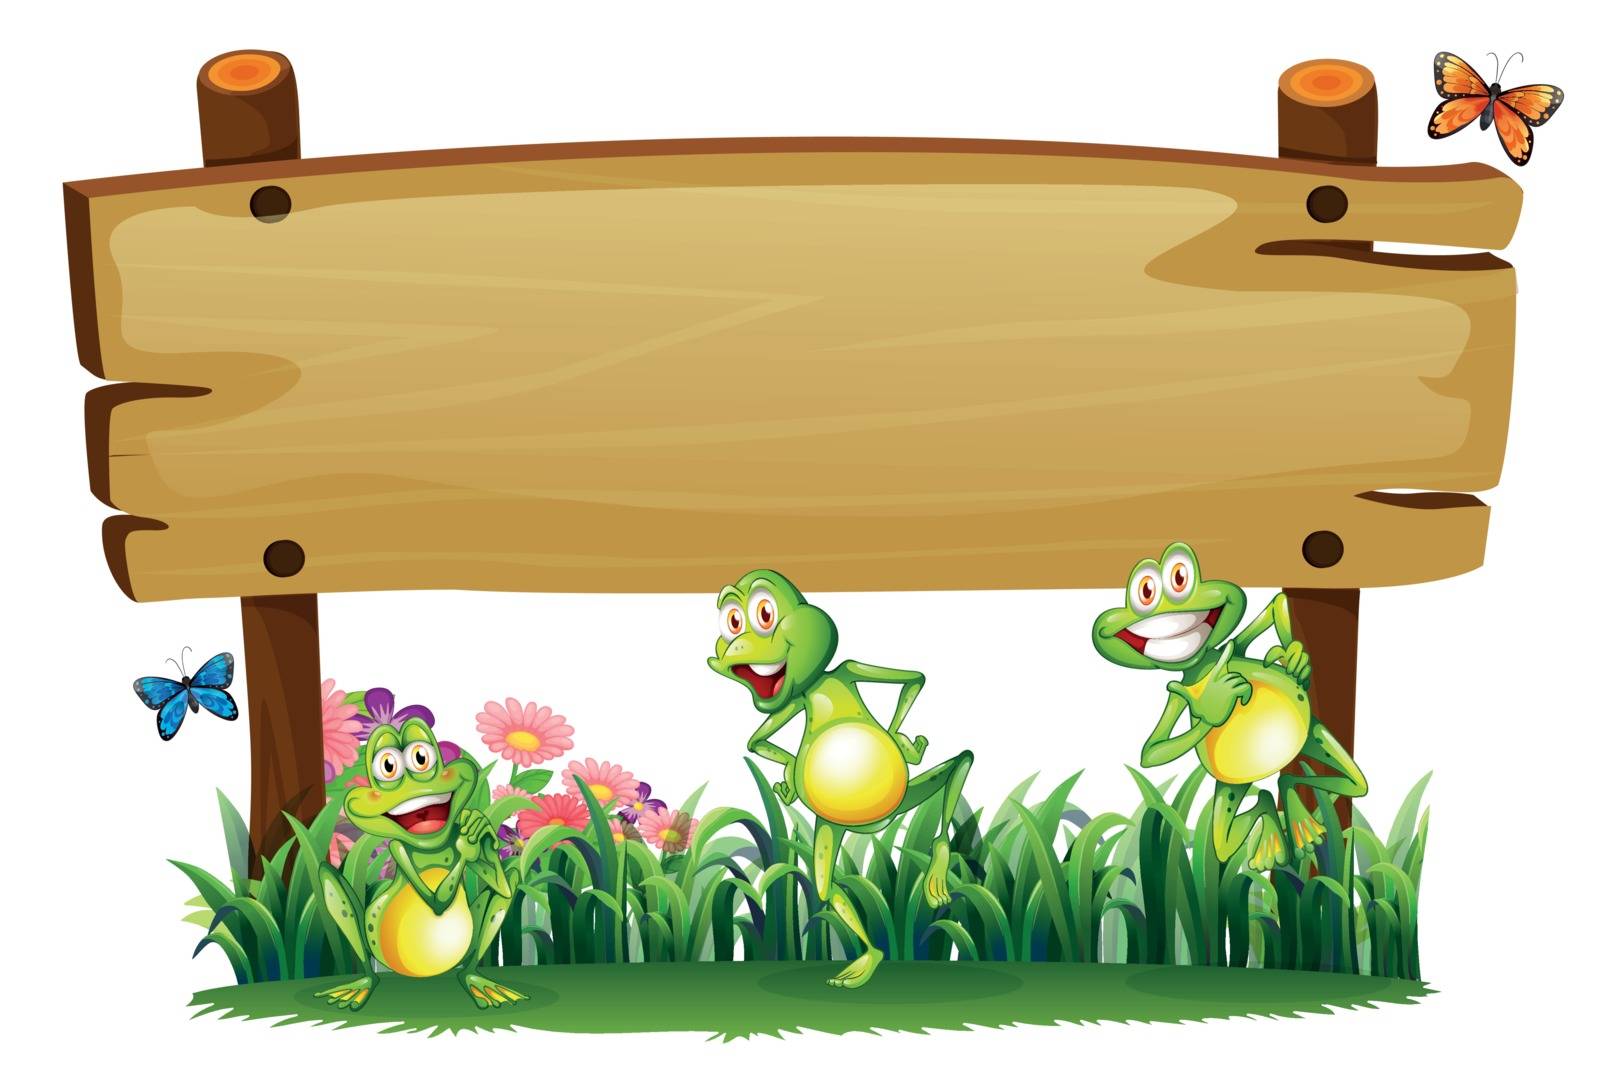 Illustration of an empty wooden board at the garden with playful frogs on a white background